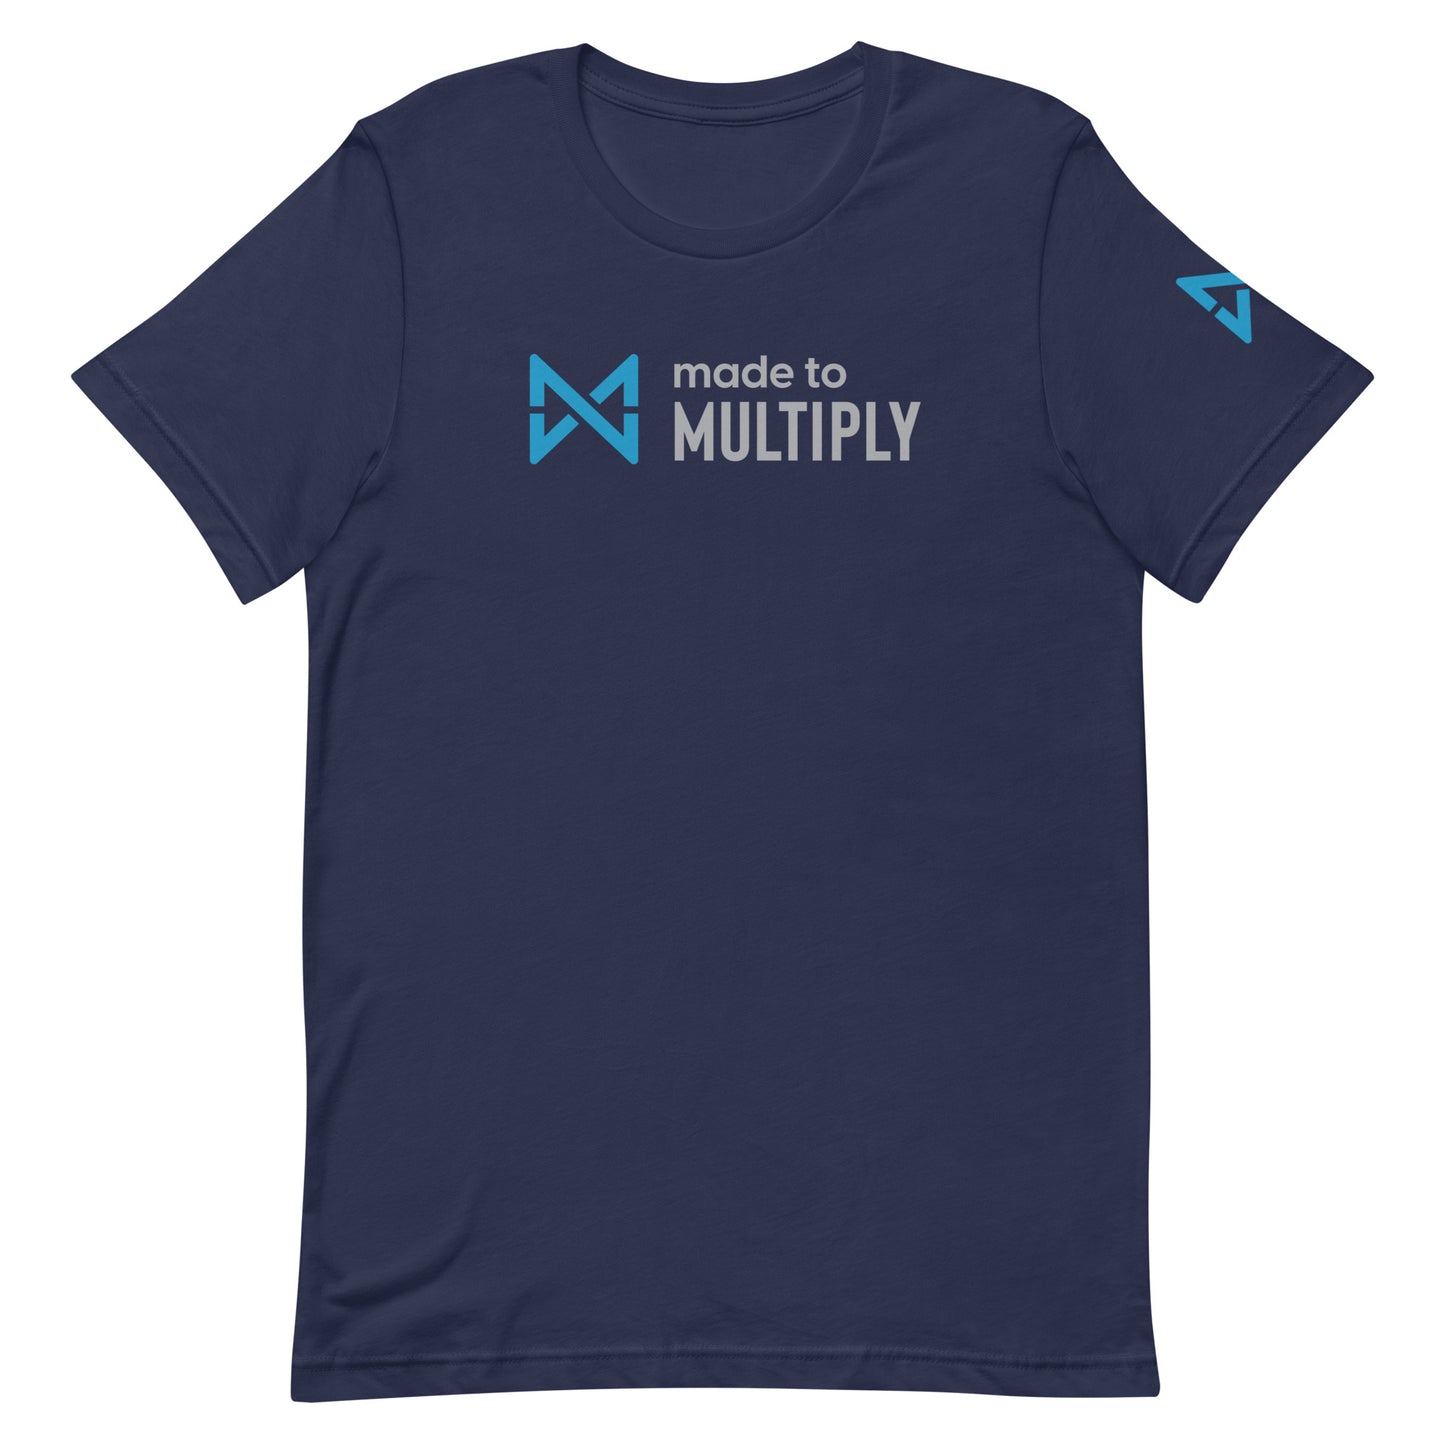 Made to Multiply -  Unisex t-shirt